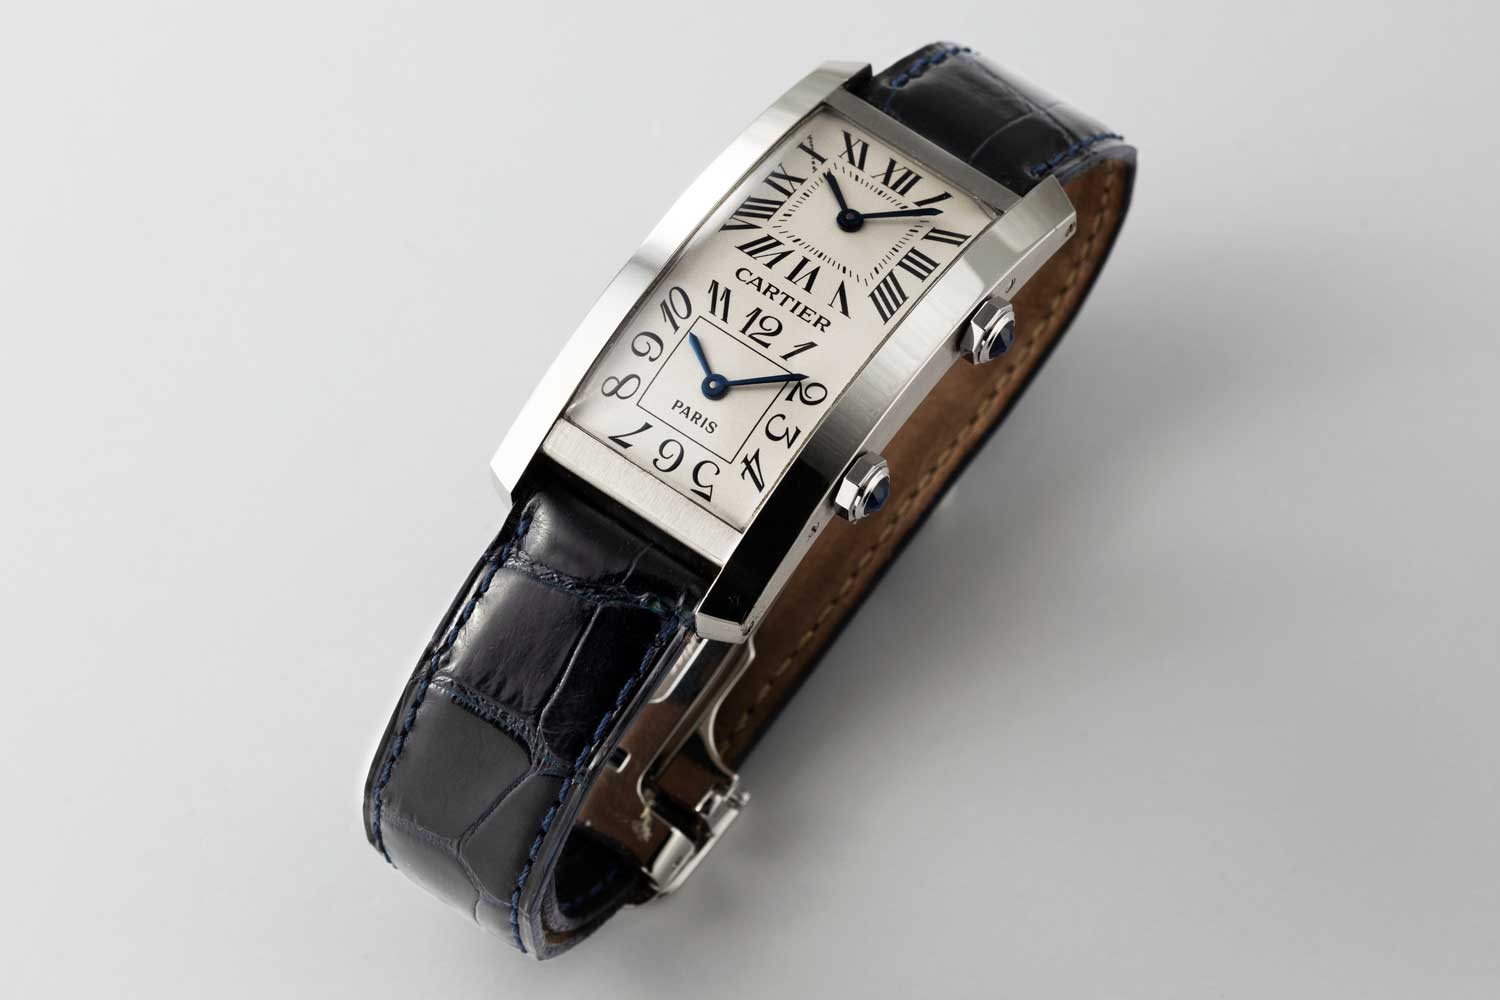 1996 No. 1/1 Cartier Paris Tank Cintrée in platinum with faceted sapphire-set winding-crown; double white gold dial with Roman chapters for home time and Arabic numerals for local time, blued steel "glaive" hands; two rhodium plated 6 3/4"' two movements, Cartier Caliber 067; this particular example is from the private collection of Auro Montanari (©Revolution)